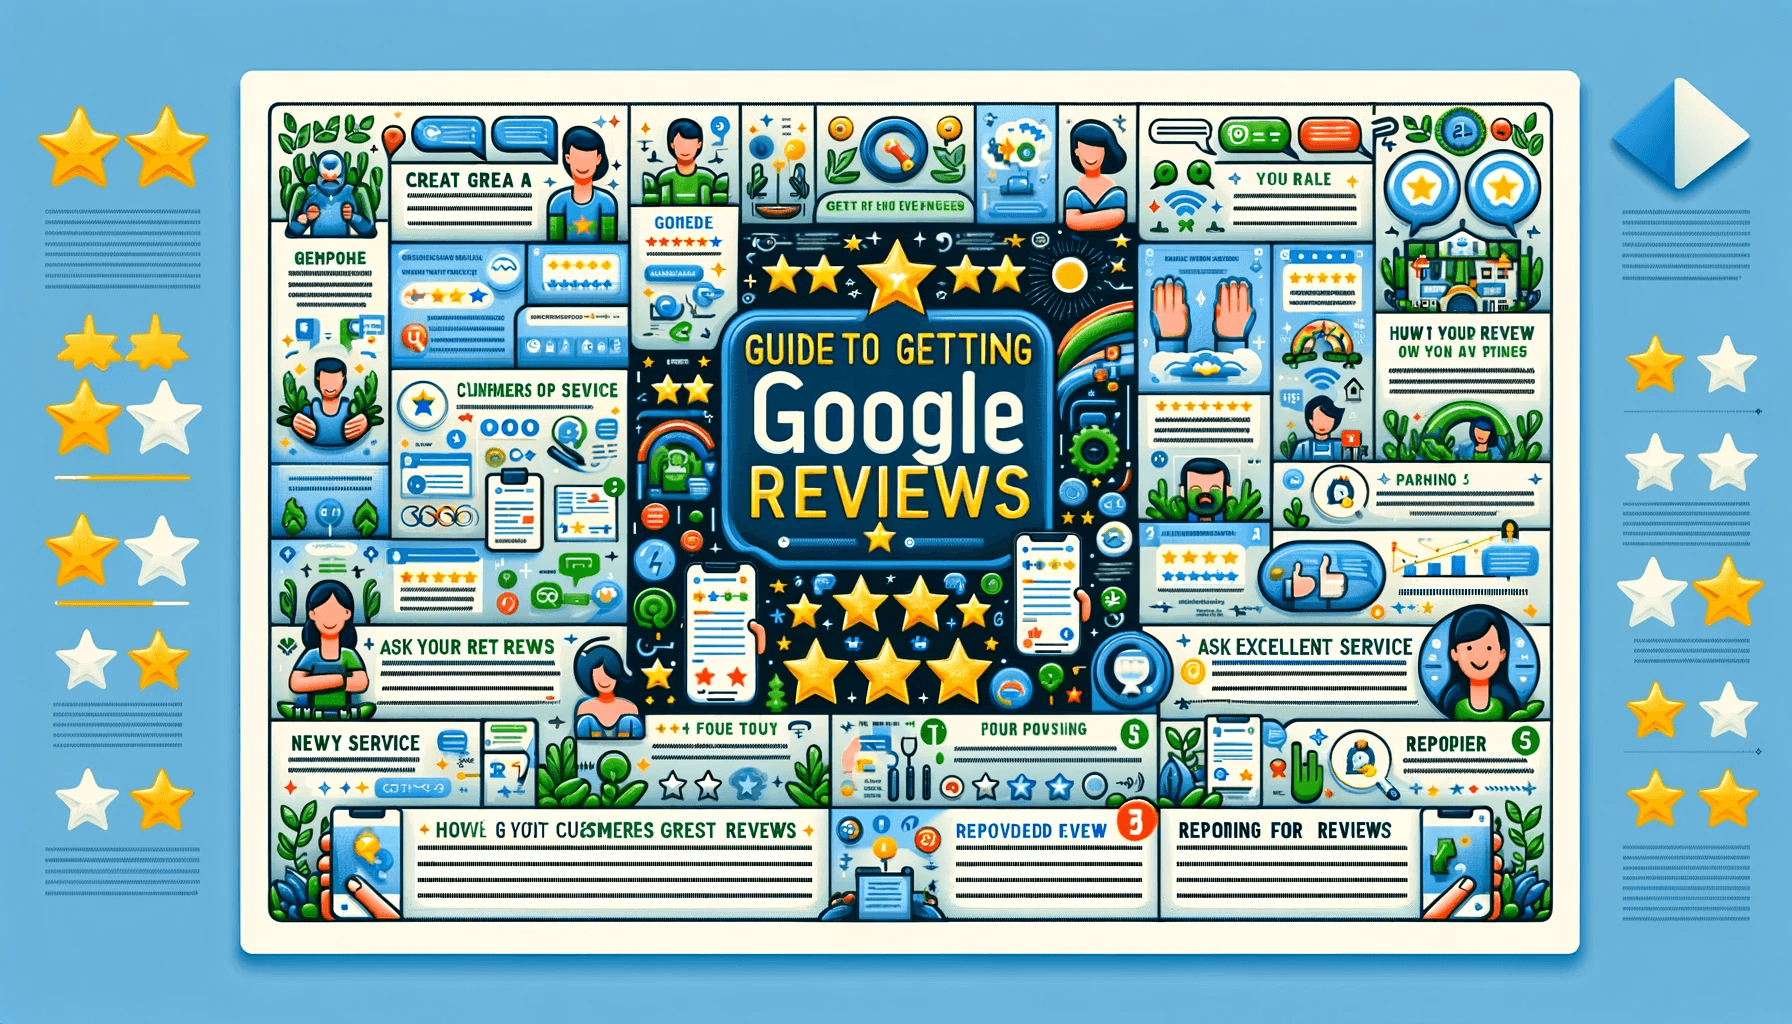 A clear guide to getting more reviews on Google